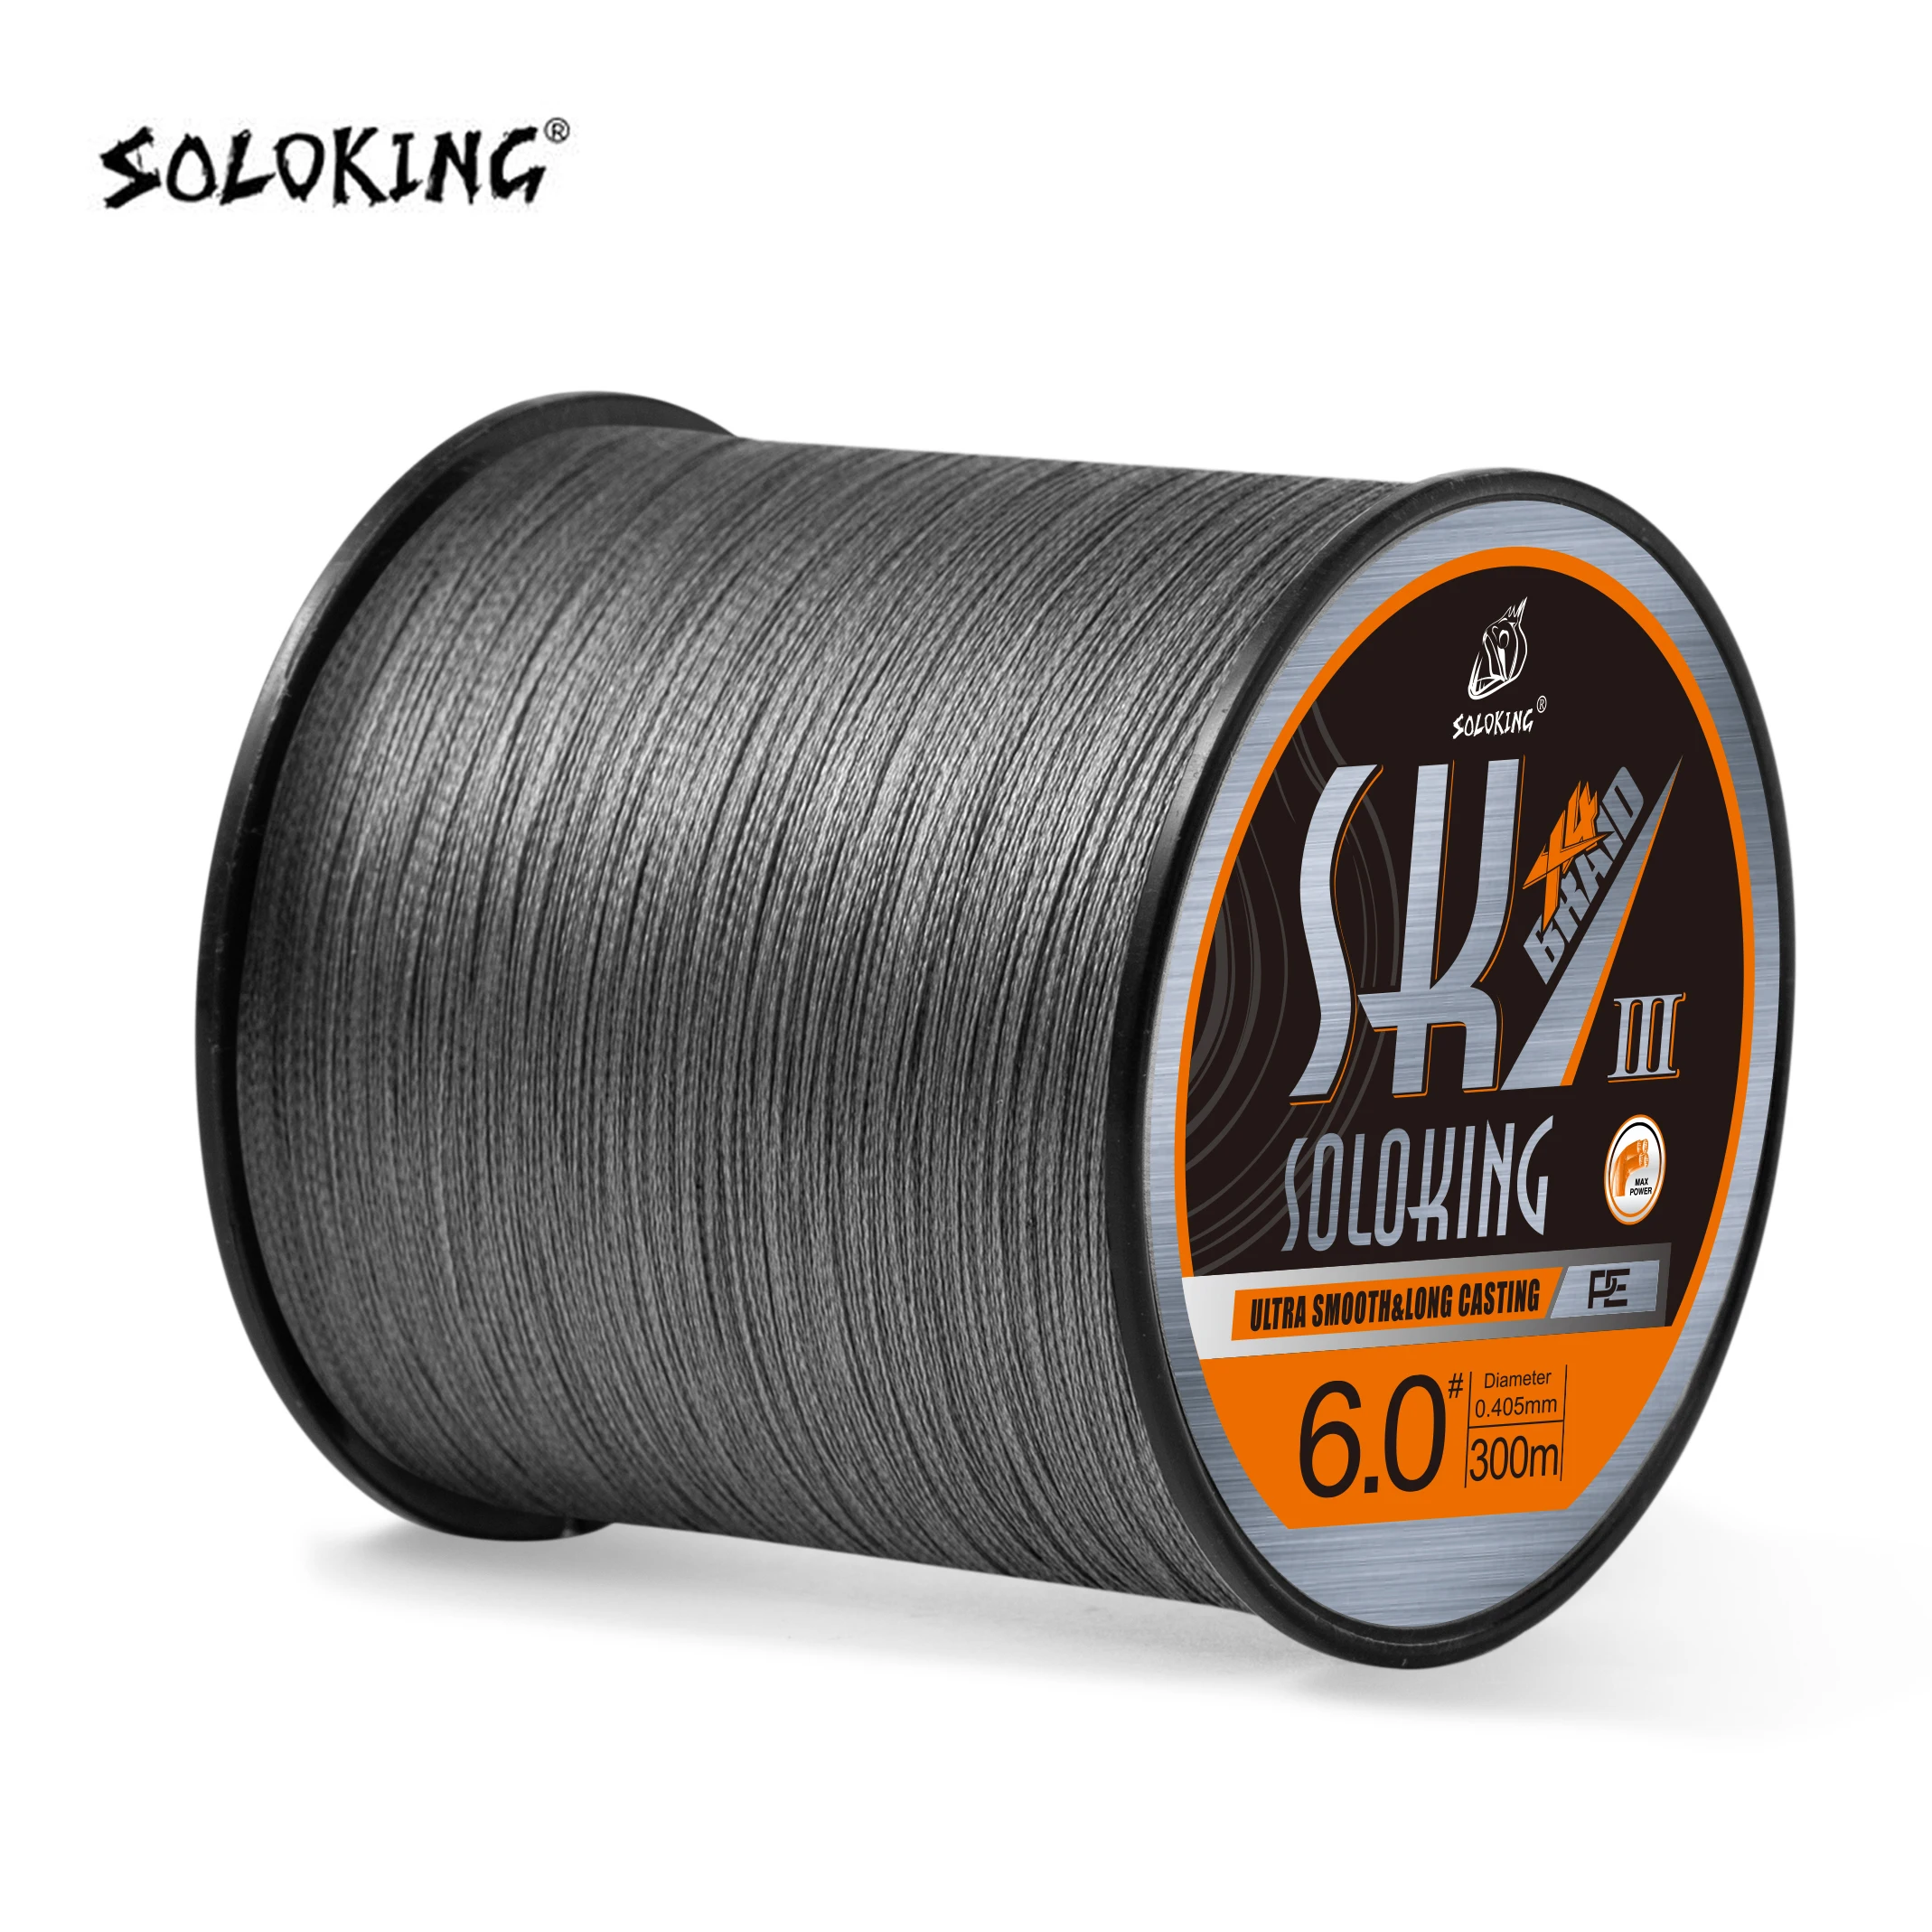 

SOLOKING 300M Braided PE Fishing Line Multifilament Fishing Line Braided Super Strong 4 Strands 10-80LB for Trout Carp Fishing